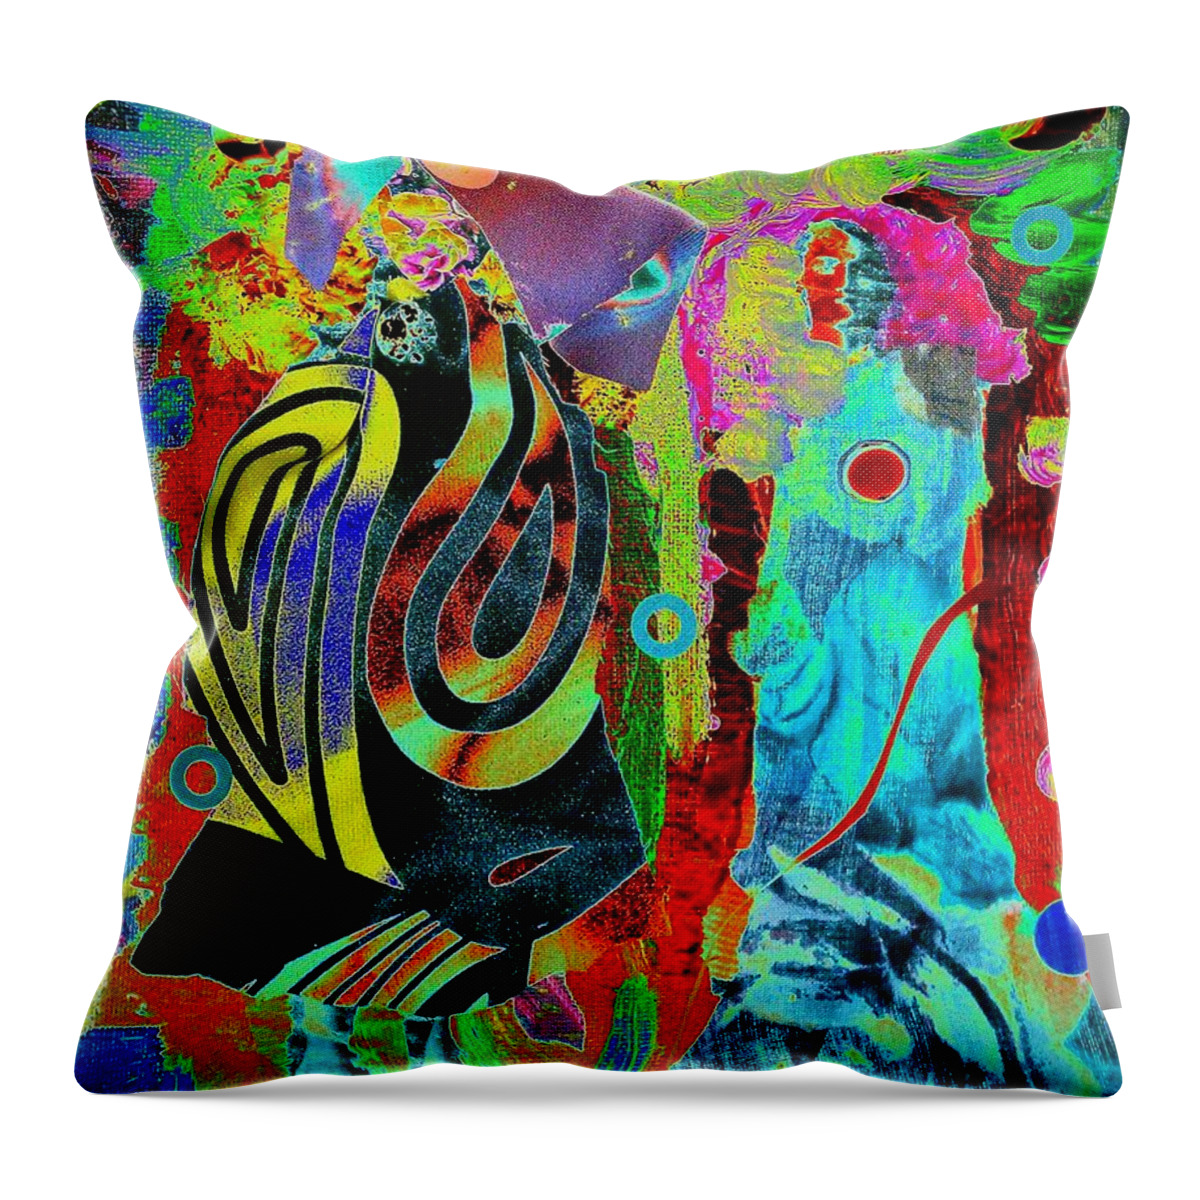 Time Throw Pillow featuring the mixed media Her Time Has Come by Jacqueline McReynolds